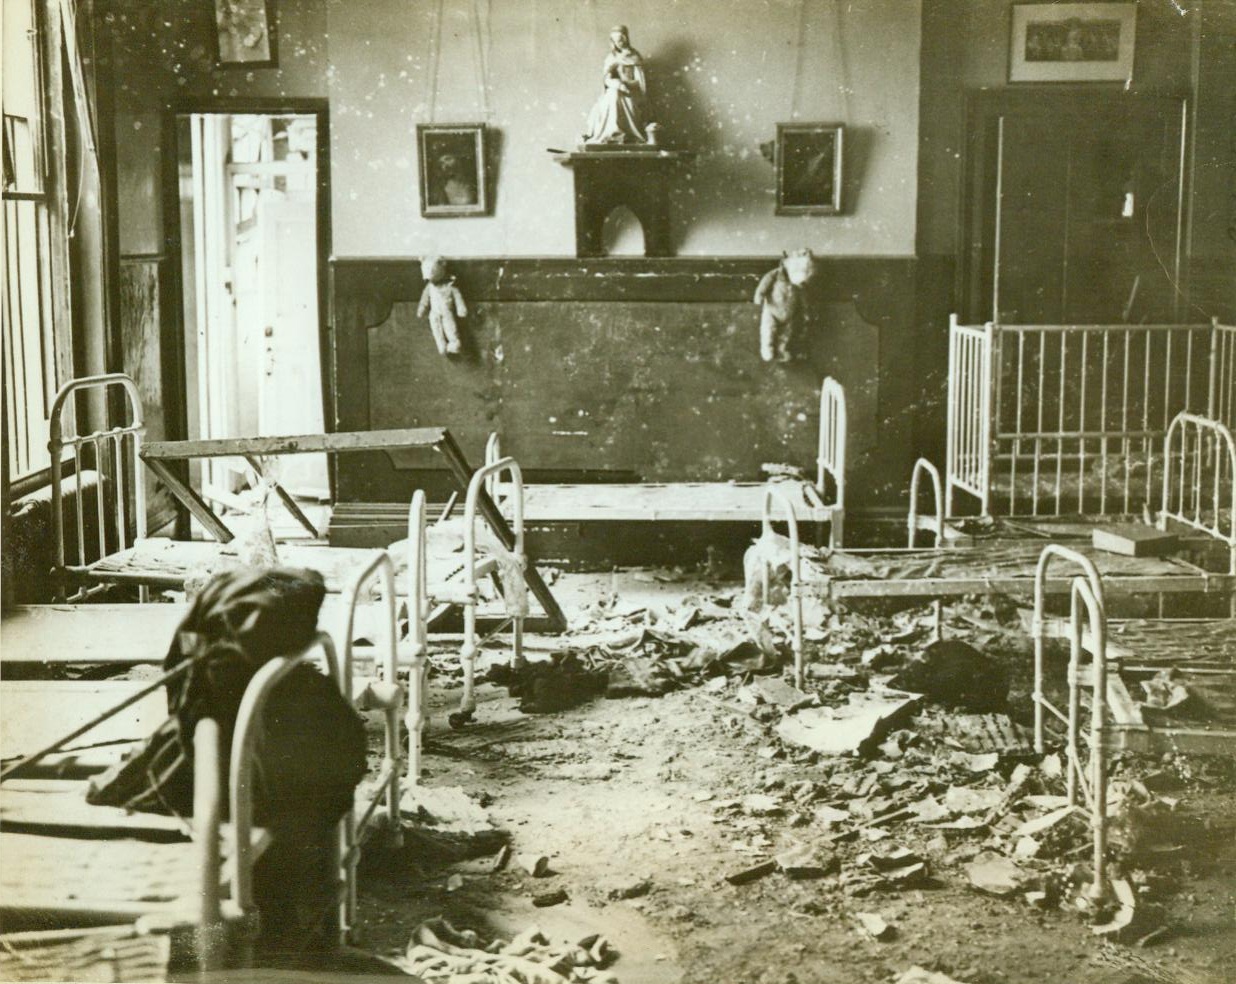 Crippled children’s home bombed, 10/21/1942. ENGLAND – One child was killed and five others injured when three Nazi sky raiders gunned and bombed a south coast convent and surrounding streets. Here are debris-covered cots in the dormitory of the convent that housed forty crippled children. Nuns braved the fire to carry them to safety in underground vaults. CREDIT LINE (ACME) 10/21/42;